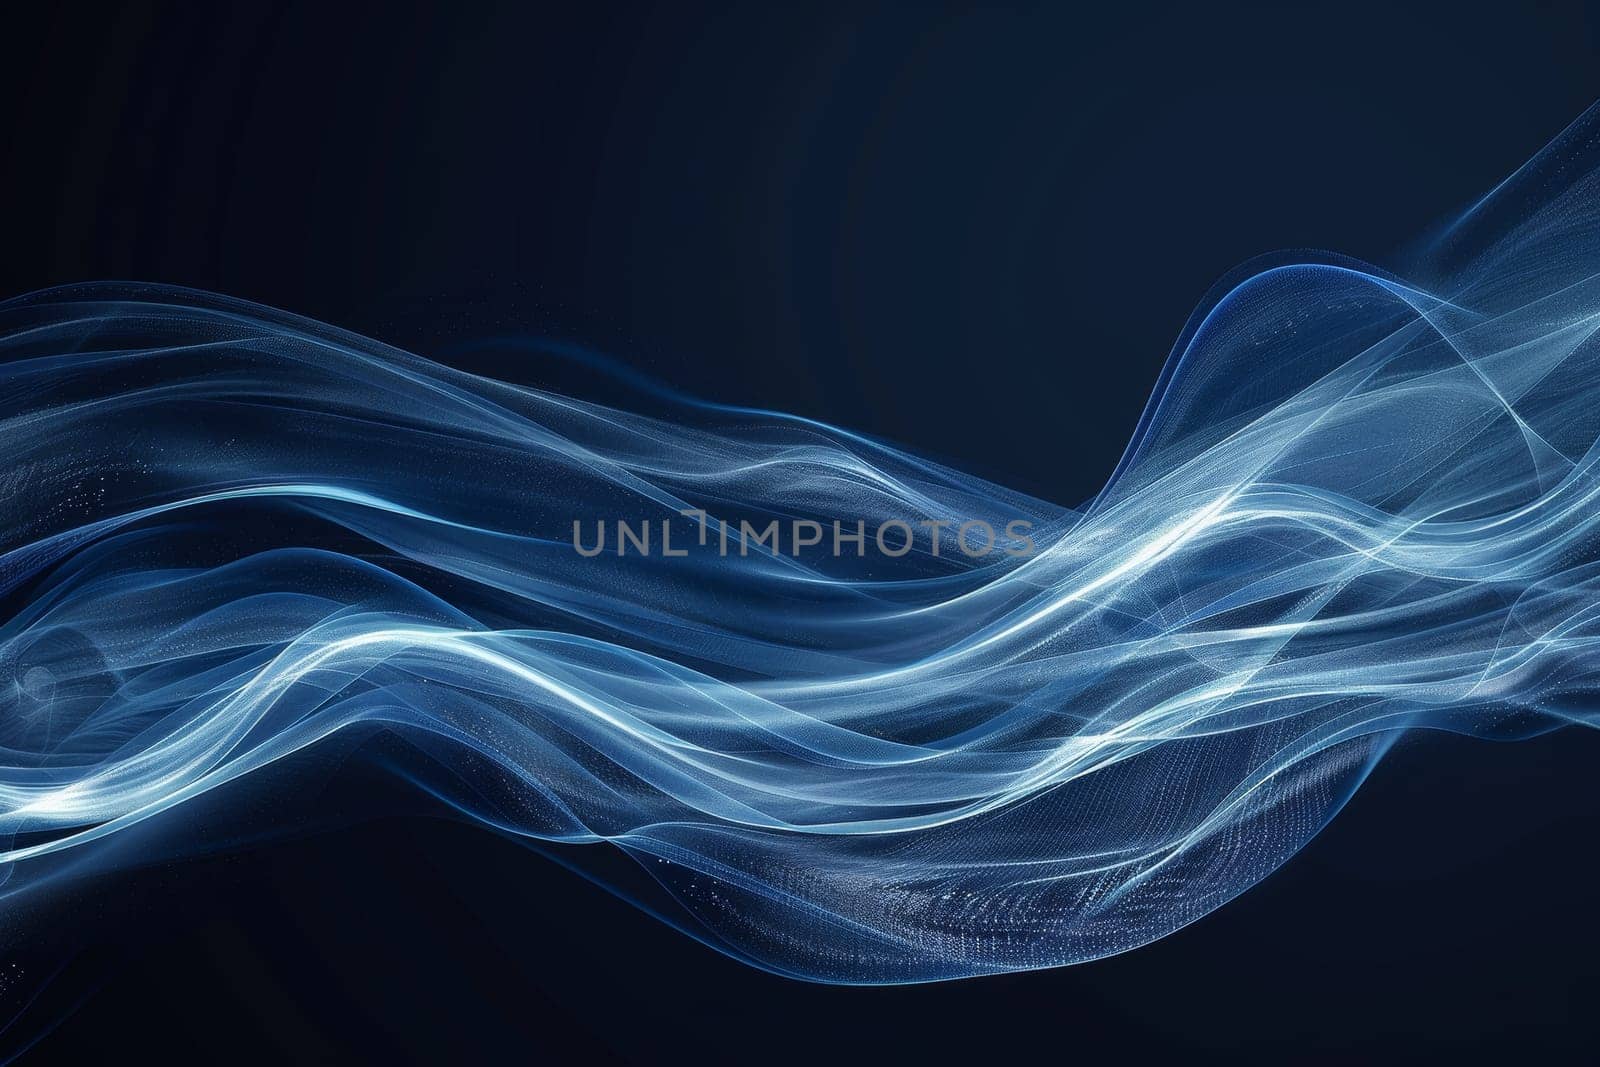 A blue wave of light is projected onto a dark background by itchaznong